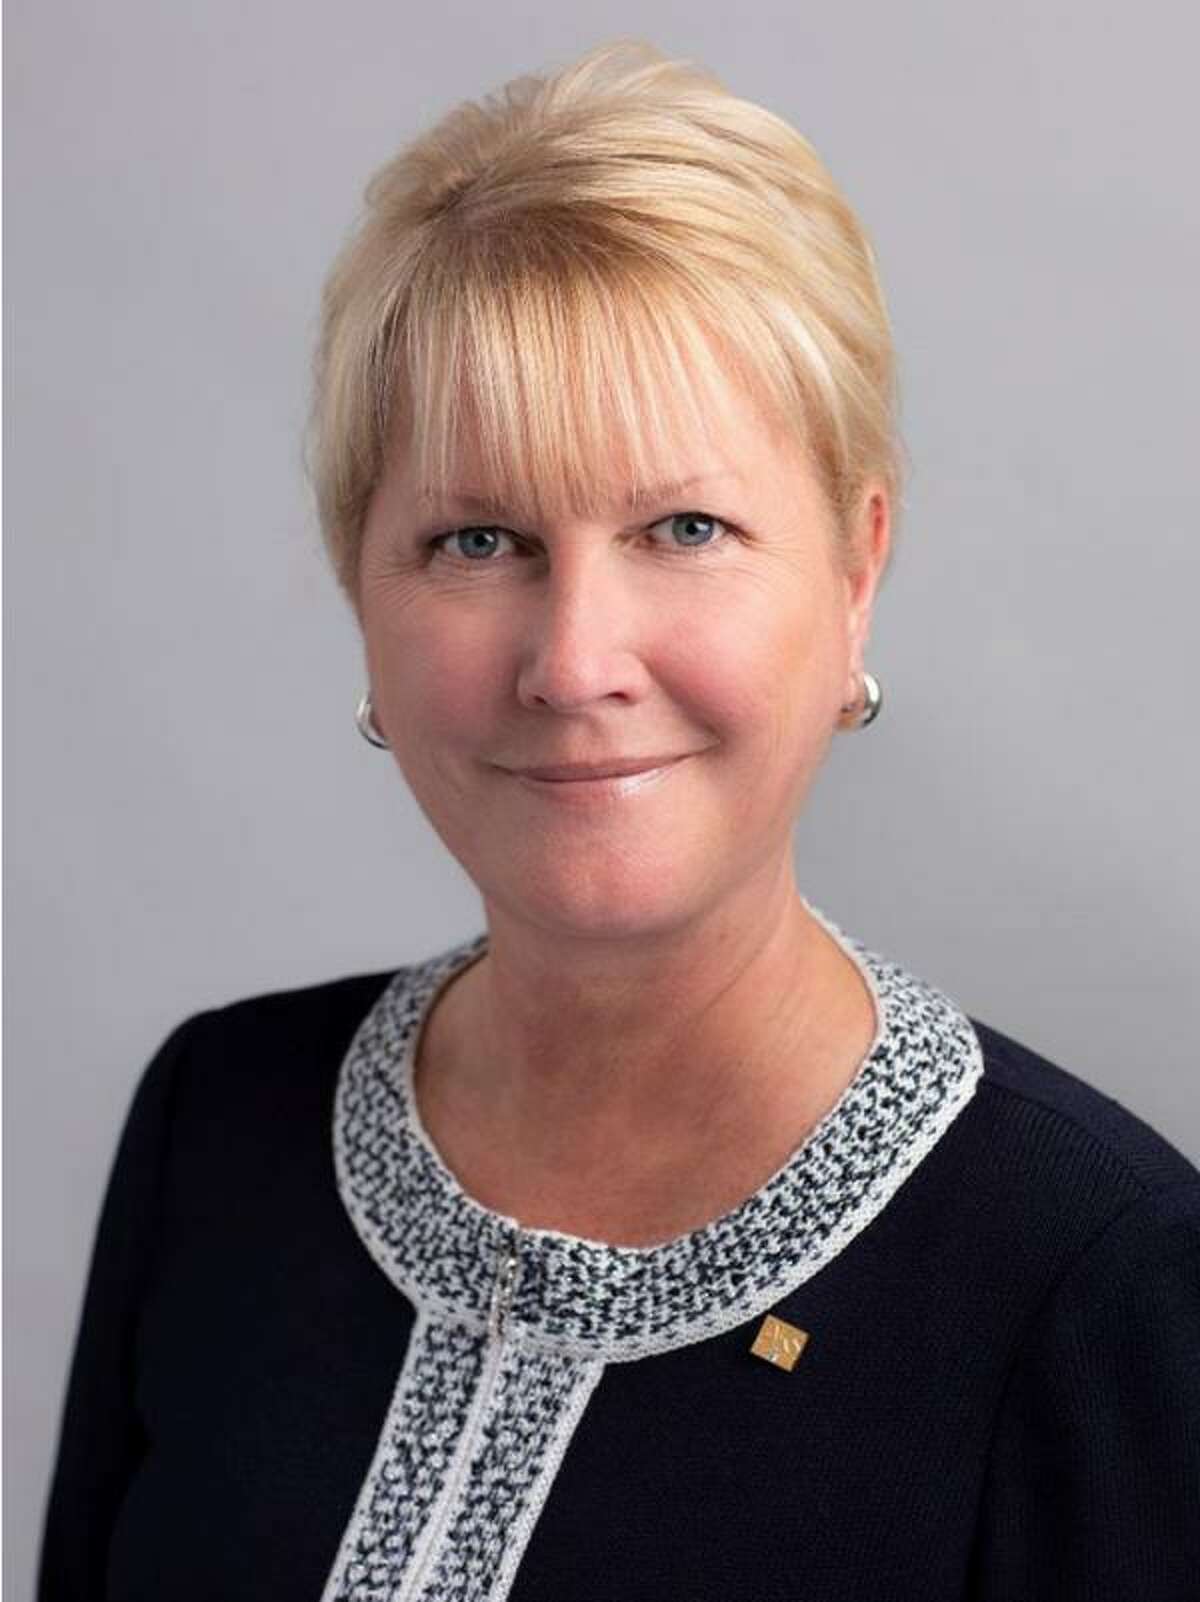 Jennifer E. Jones, of the Rotary Club of Windsor-Roseland, Ontario, Canada, will be the President of Rotary International for 2022-23. She marks the first female in that position.